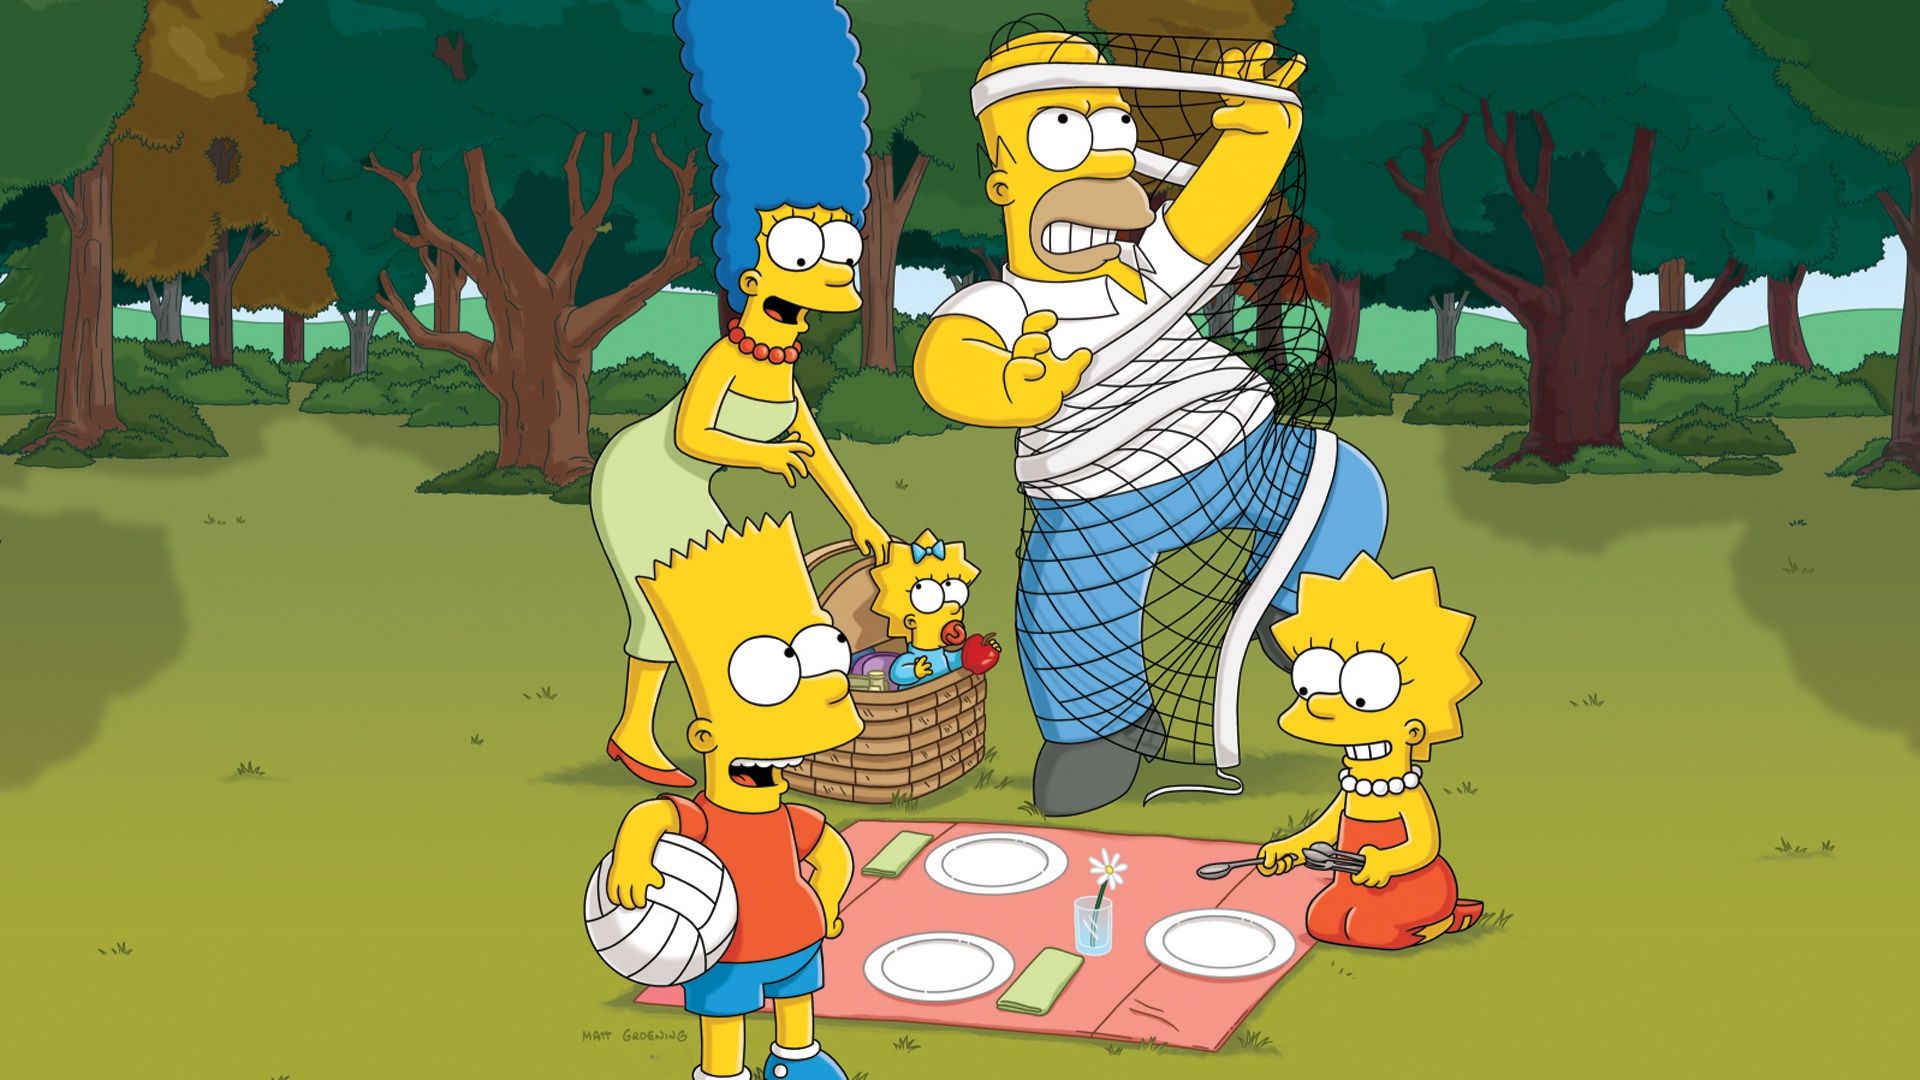 The Simpsons family in a park, with Homer, Marge, Bart, Lisa and Maggie sitting on a picnic blanket - The Simpsons